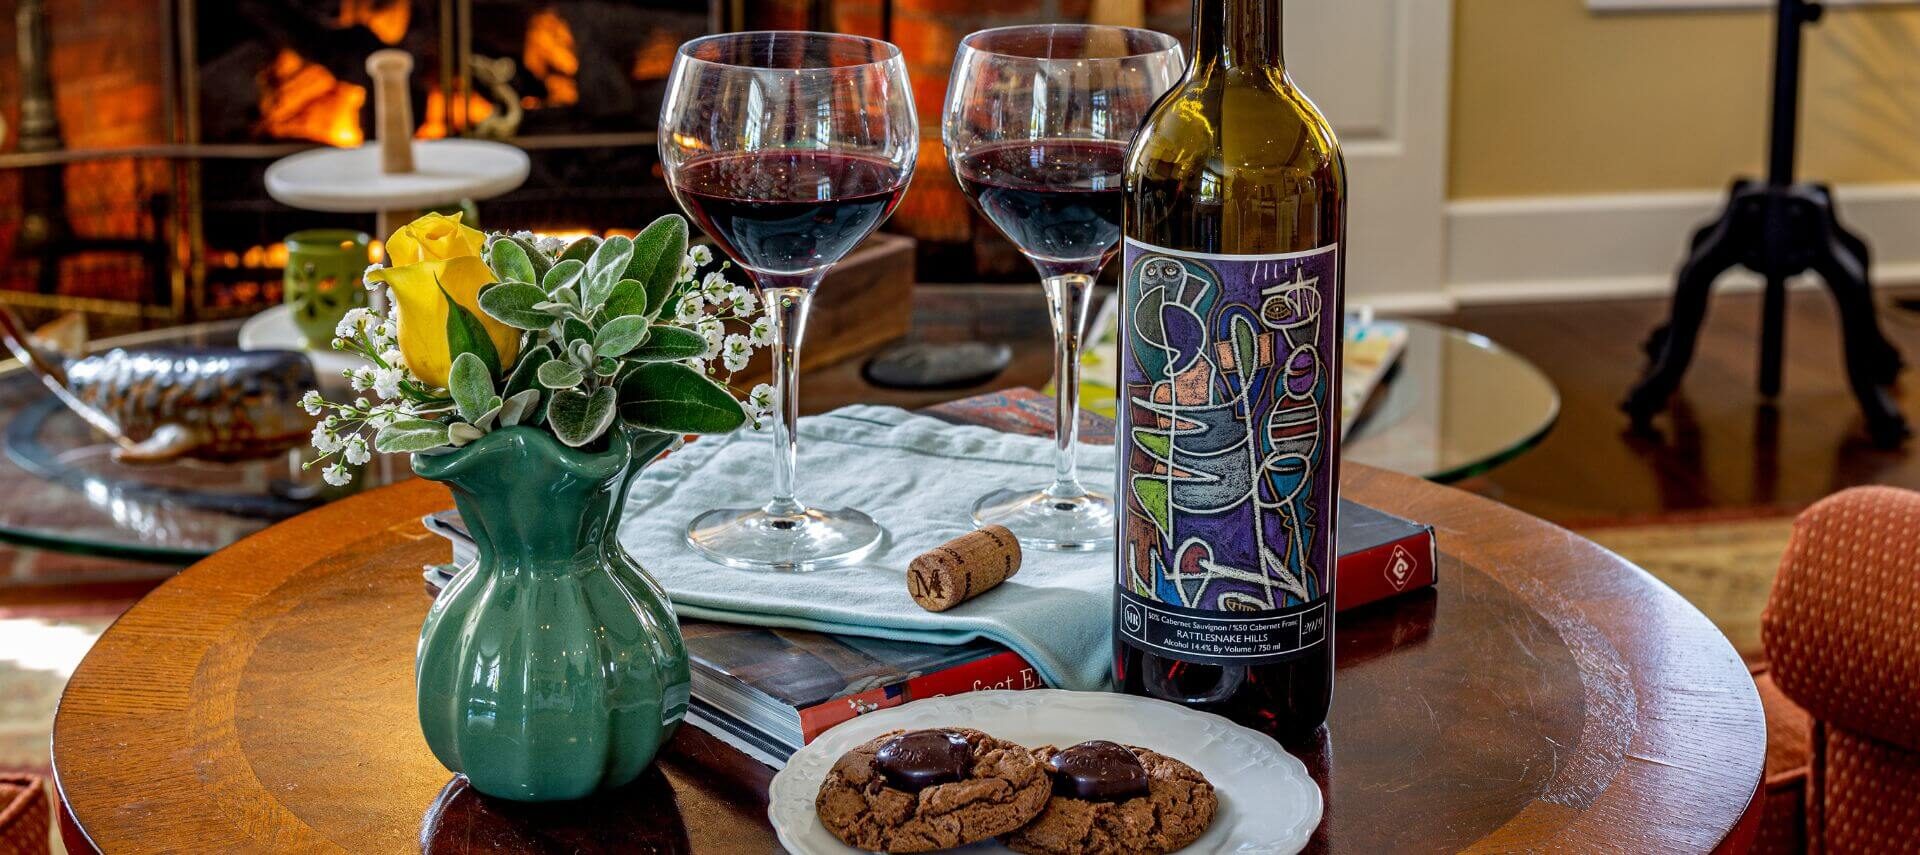 A table with a plate of chocolate cookies, a bottle of wine with 2 wine glasses filled with red wine, a green vase with a yellow rose, and a fireplace in the background.